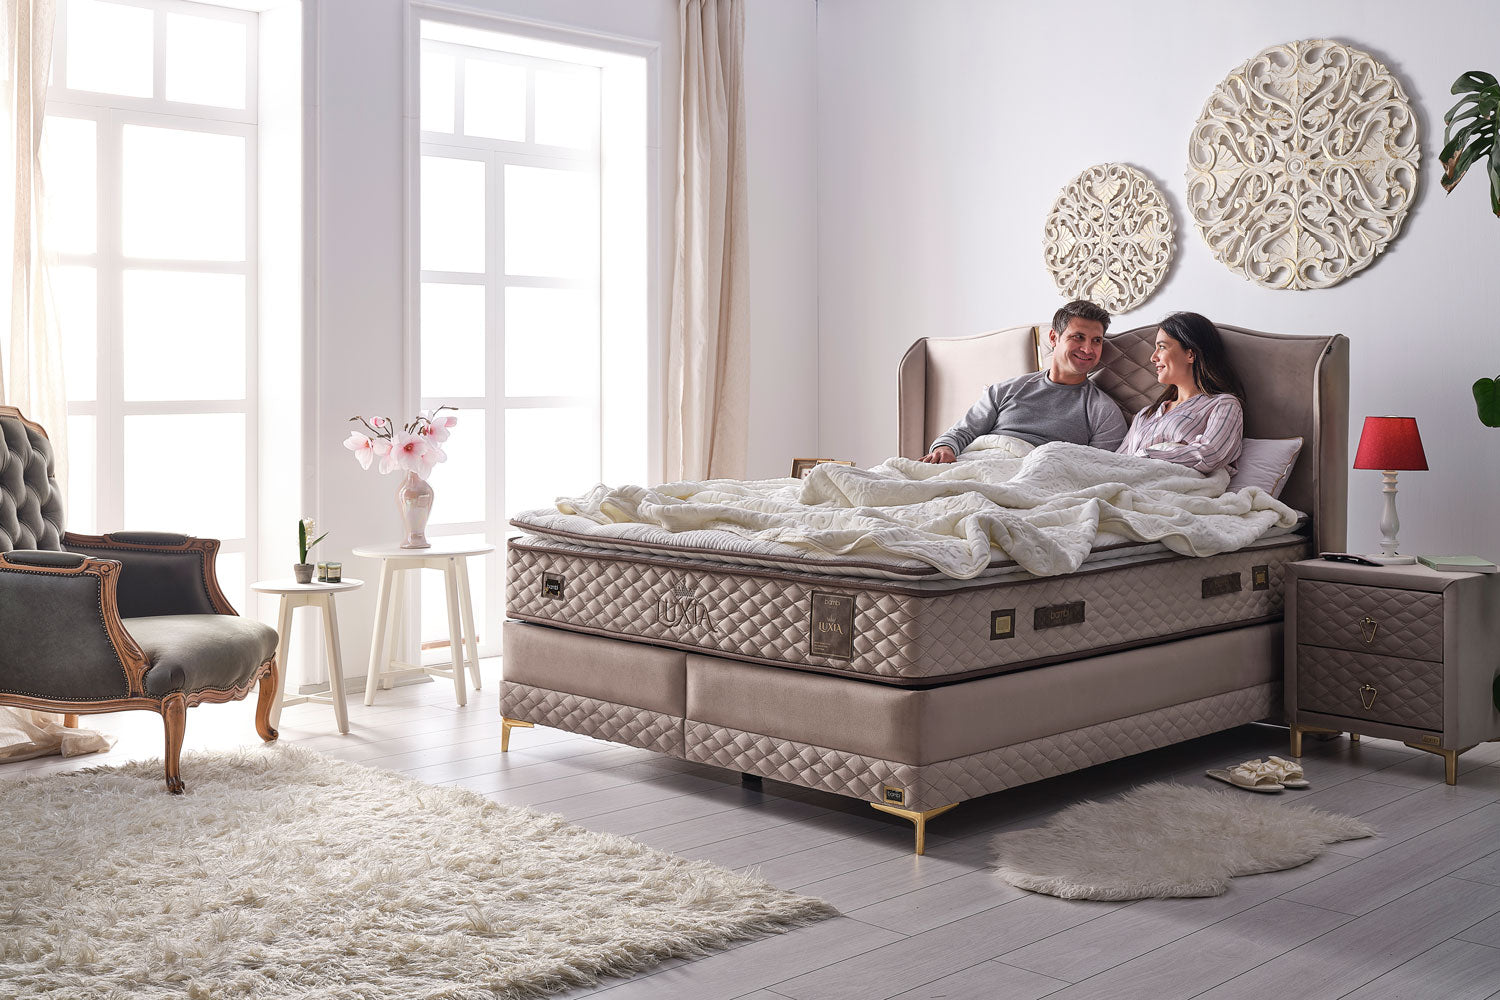 Luxia Boxspring Bett Schlafzimmer